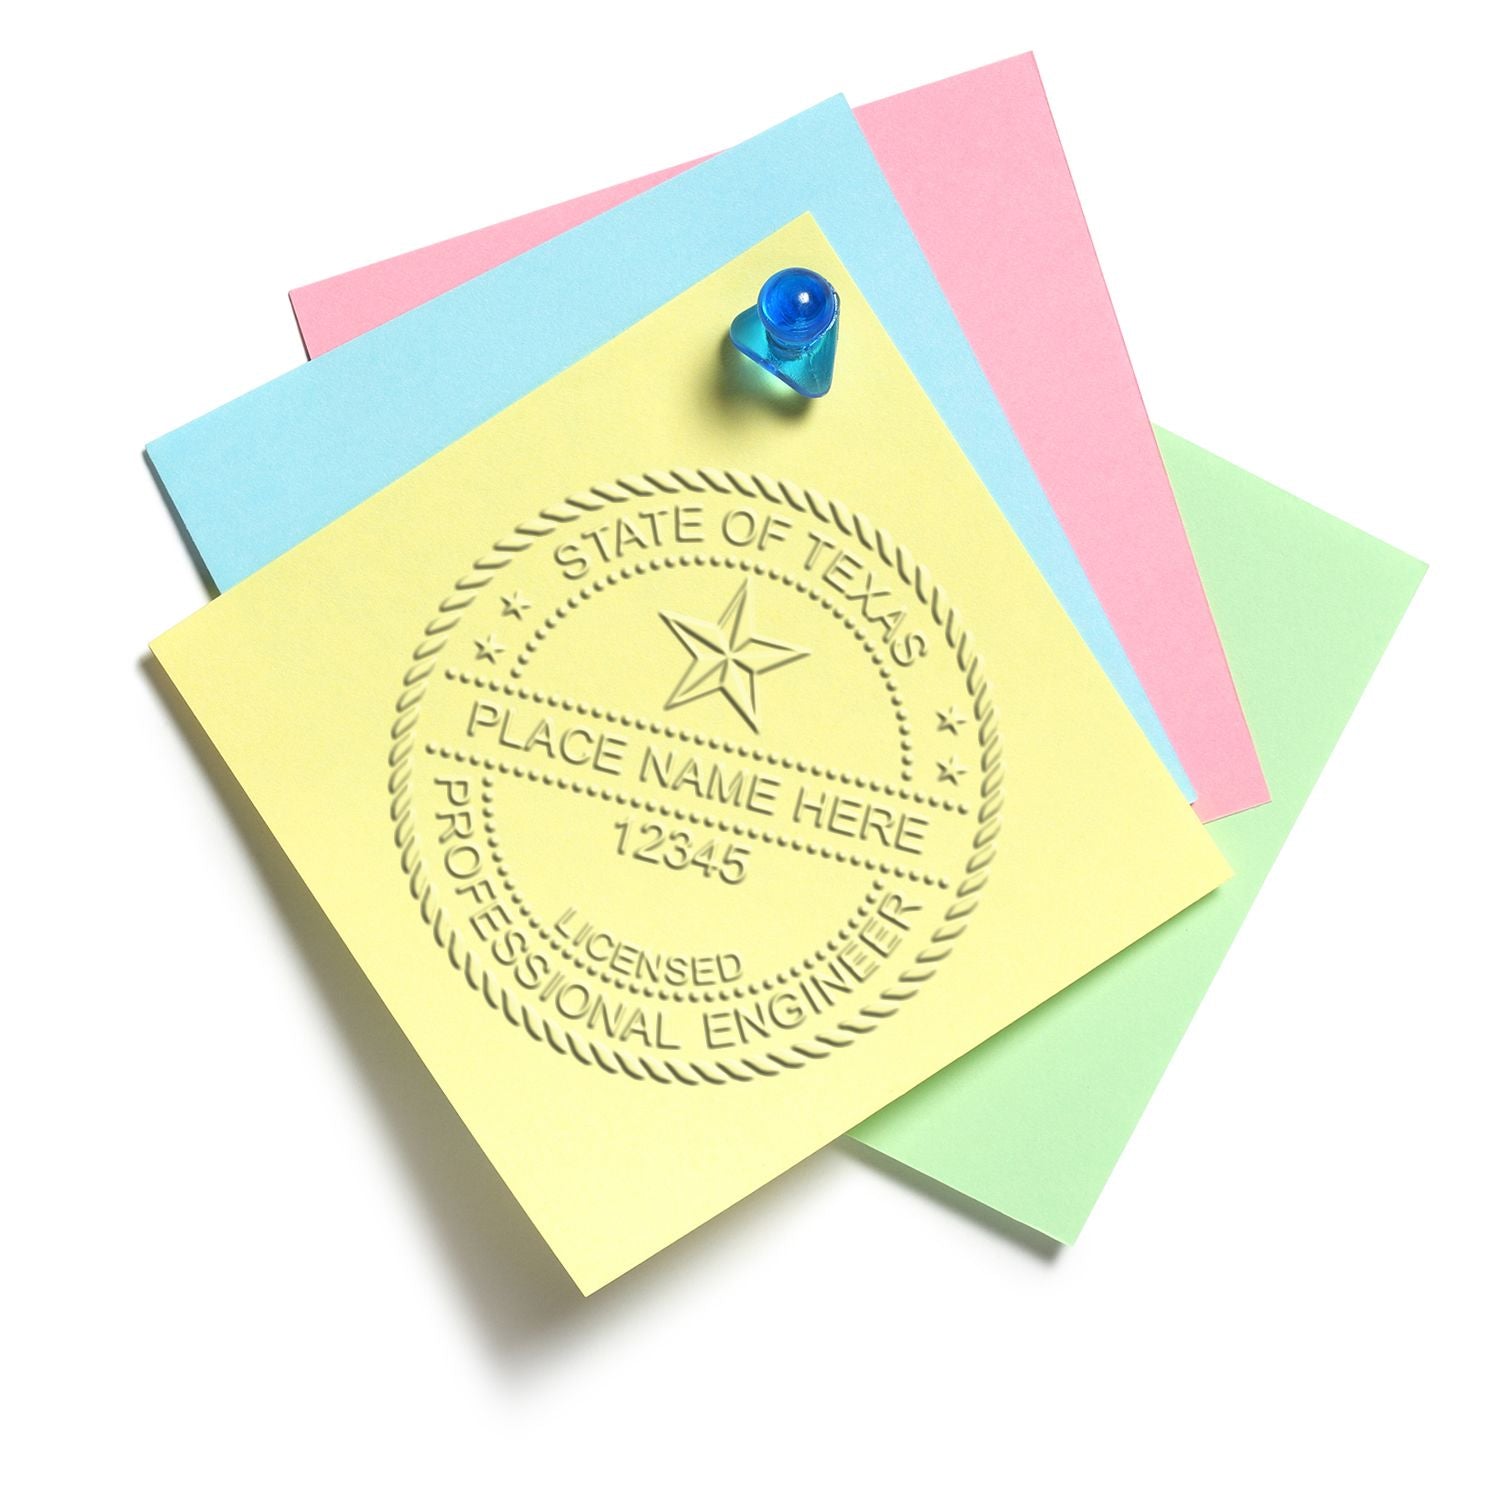 The main image for the State of Texas Extended Long Reach Engineer Seal depicting a sample of the imprint and electronic files